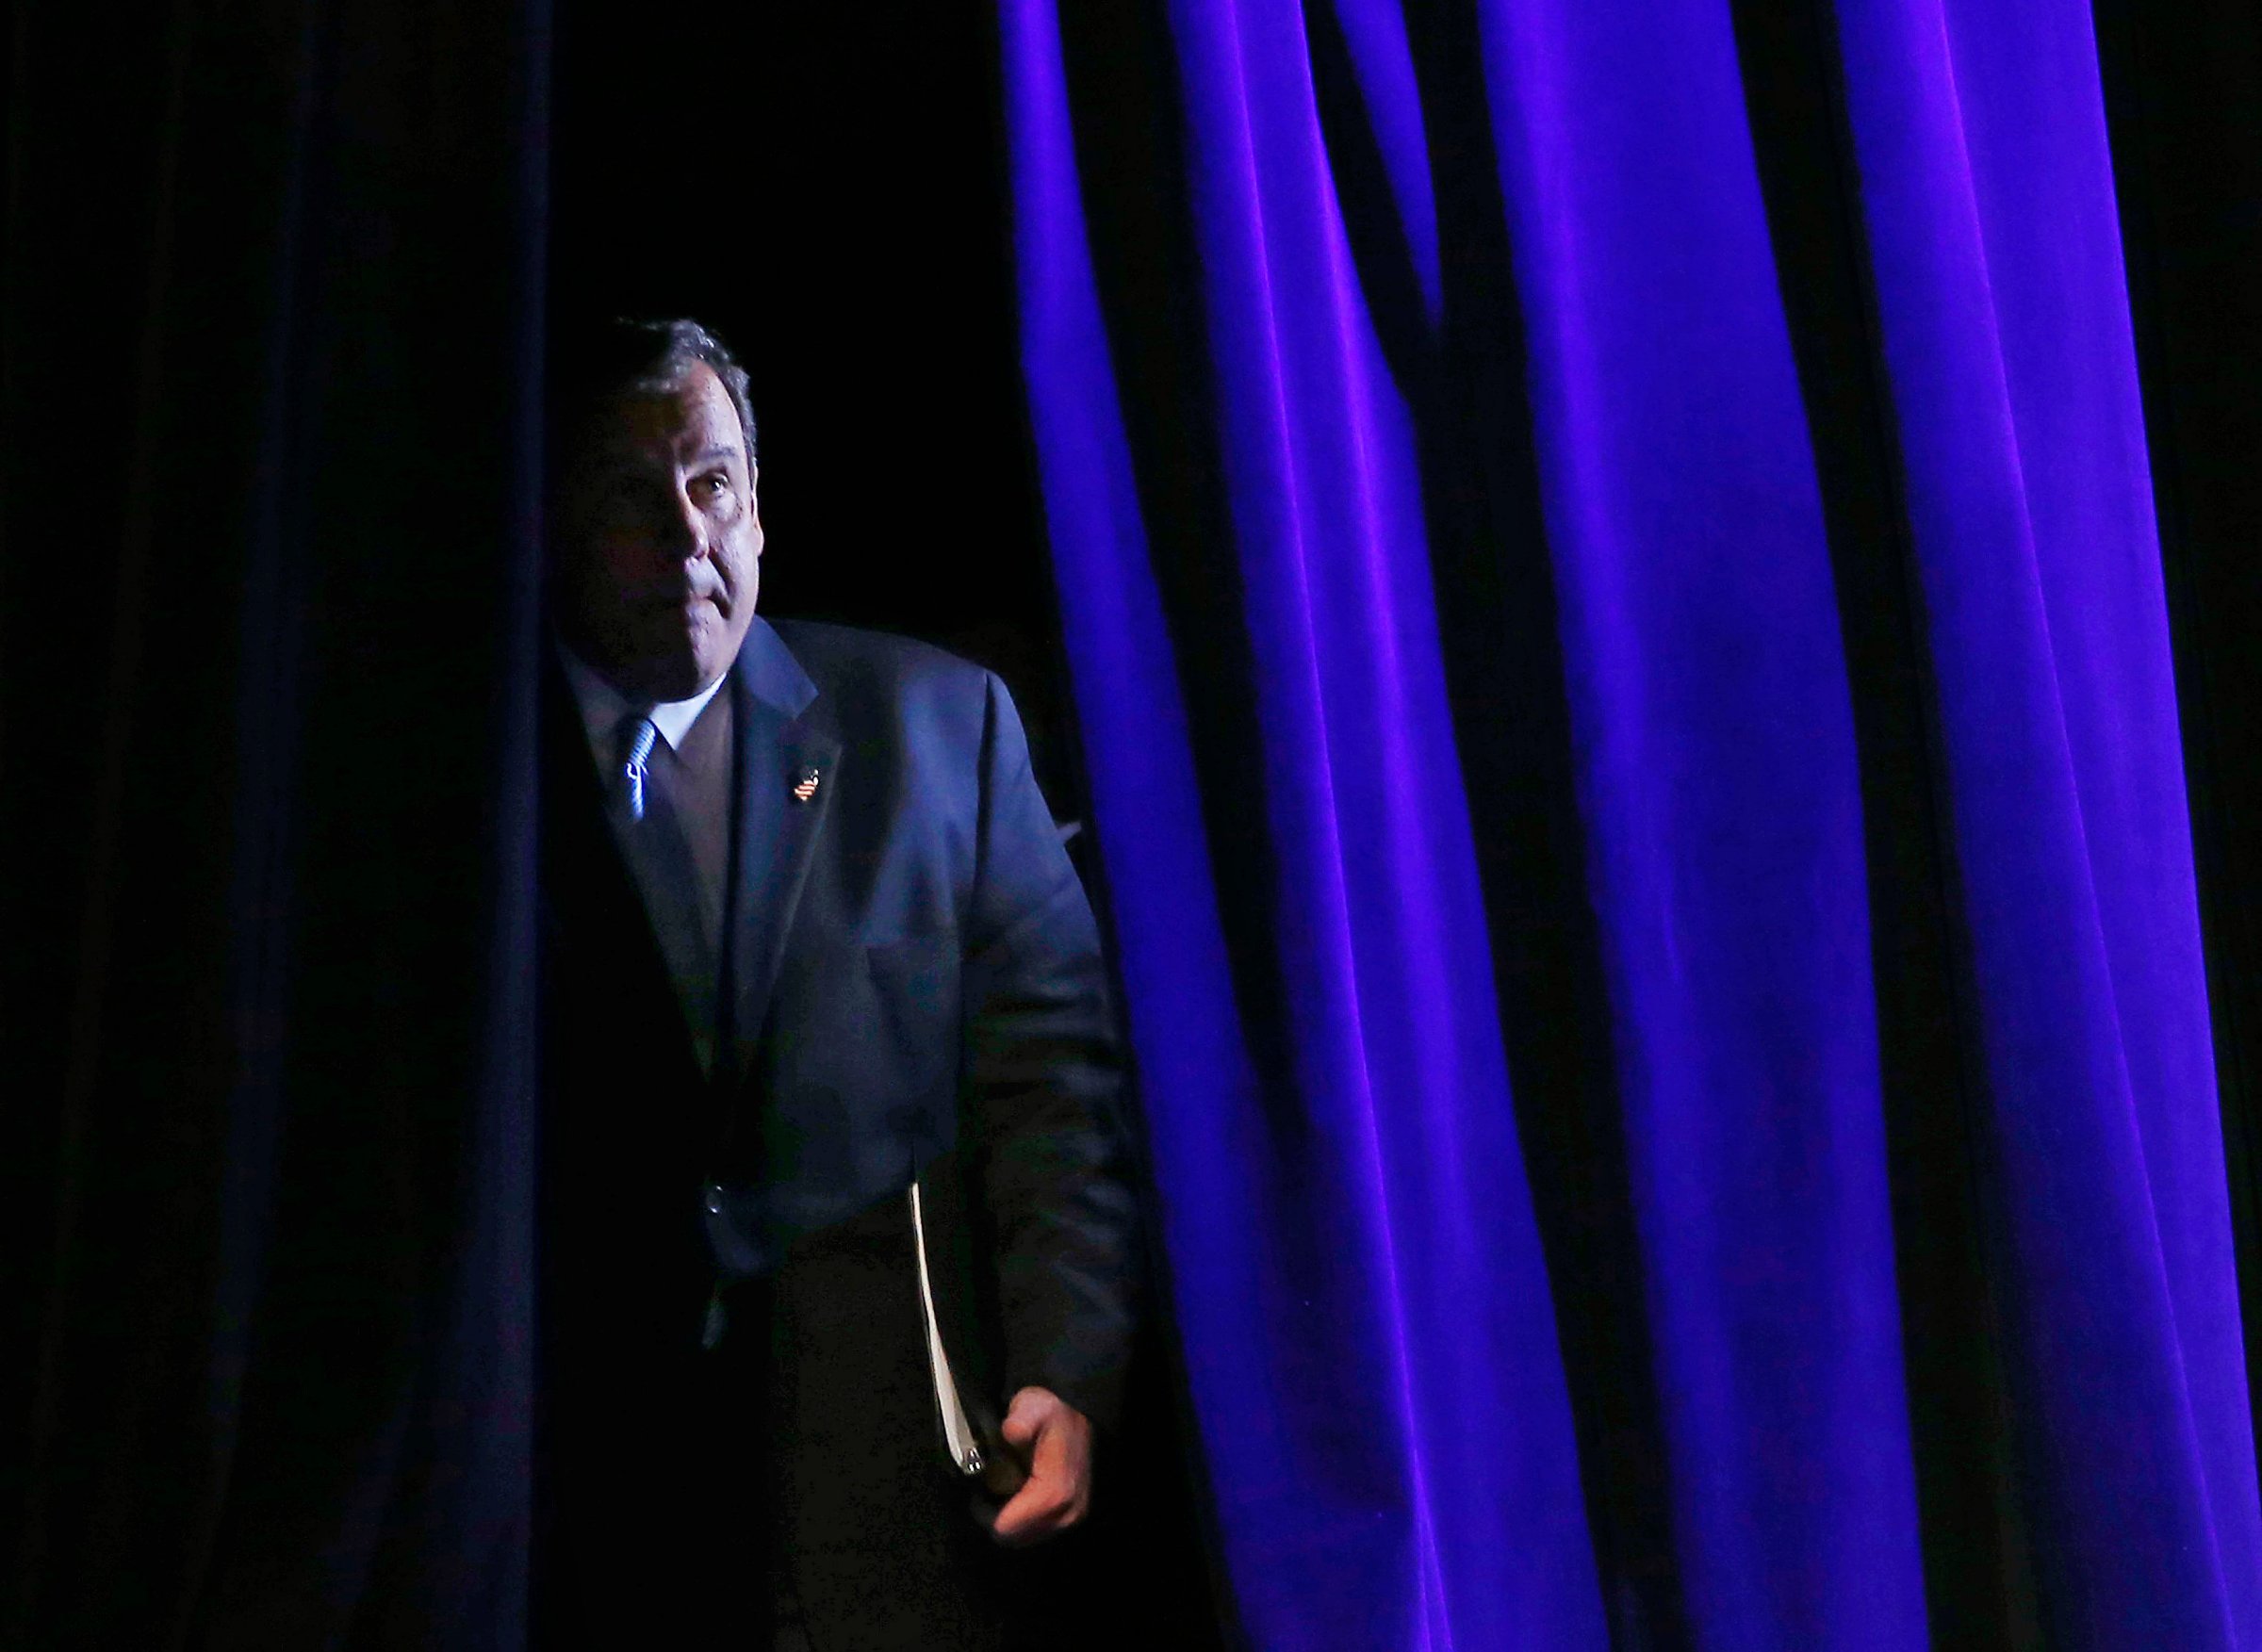 Governor of New Jersey Chris Christie arrives to speak at the Freedom Summit in Des Moines